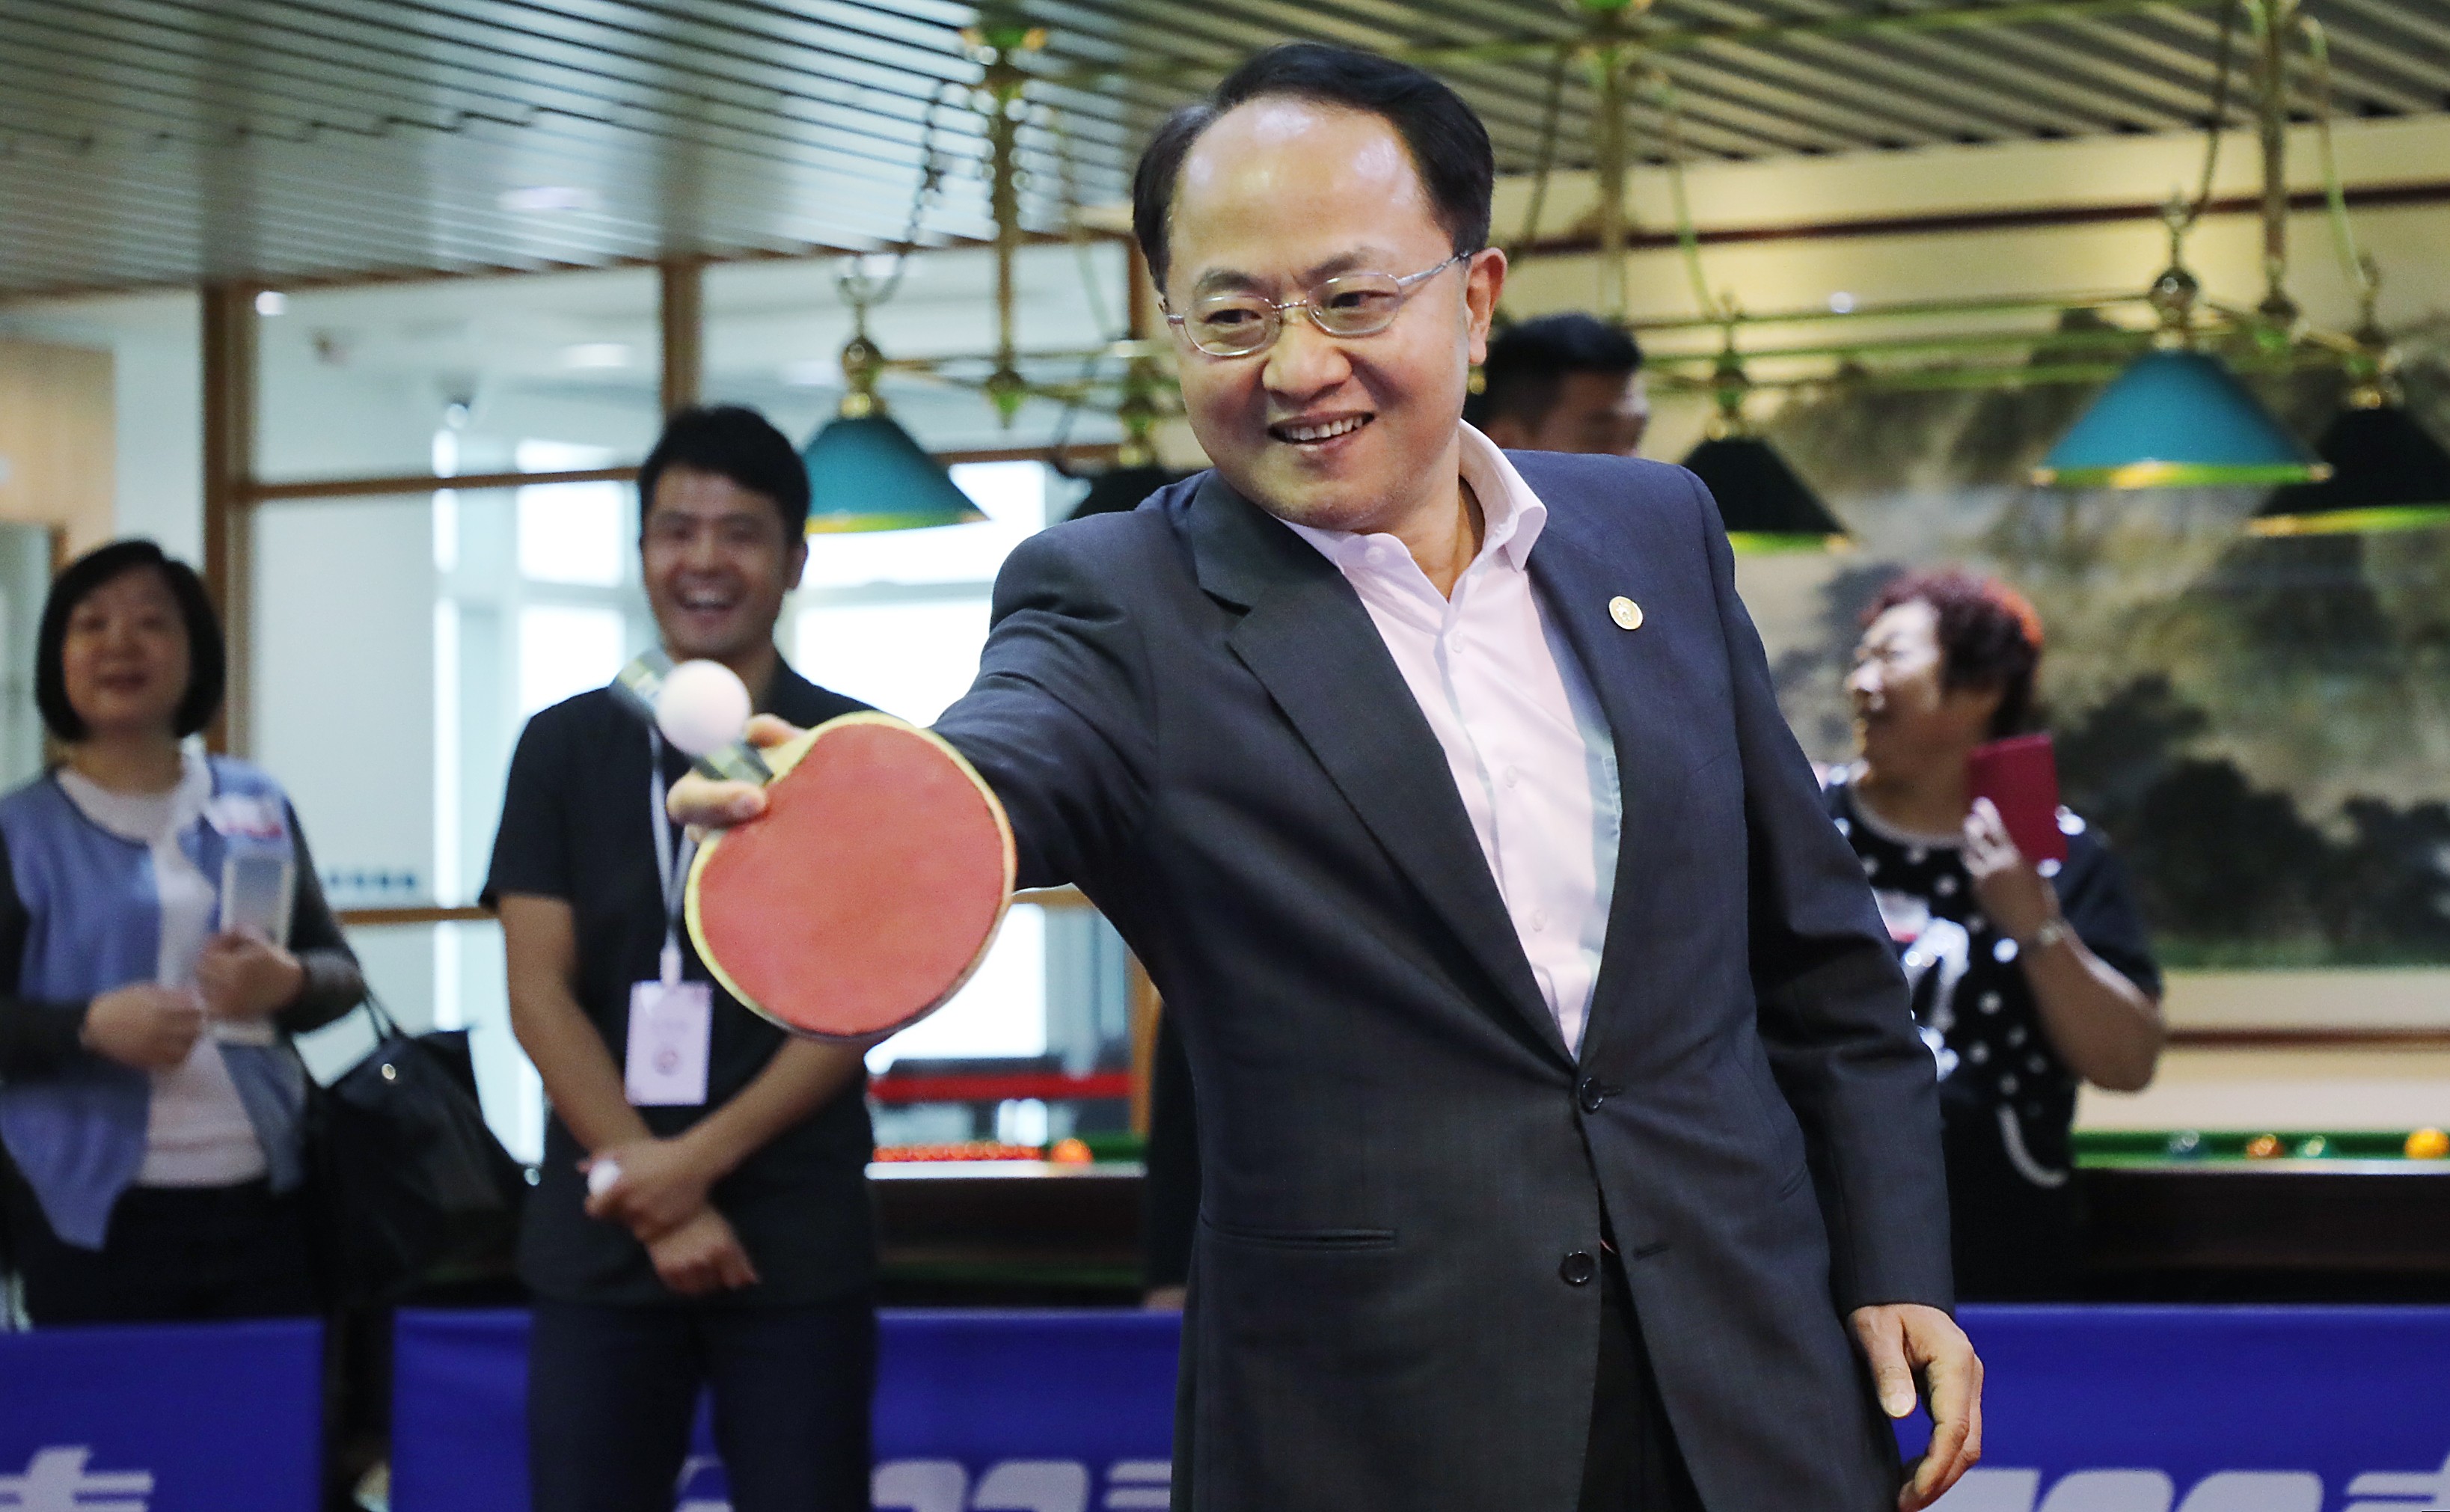 Wang Zhimin, head of the central government’s liaison office in Hong Kong, plays table tennis during the office’s open day on April 28. Wang has invited the city’s pan-democratic legislators to visit his office in Western. Photo: Edward Wong 